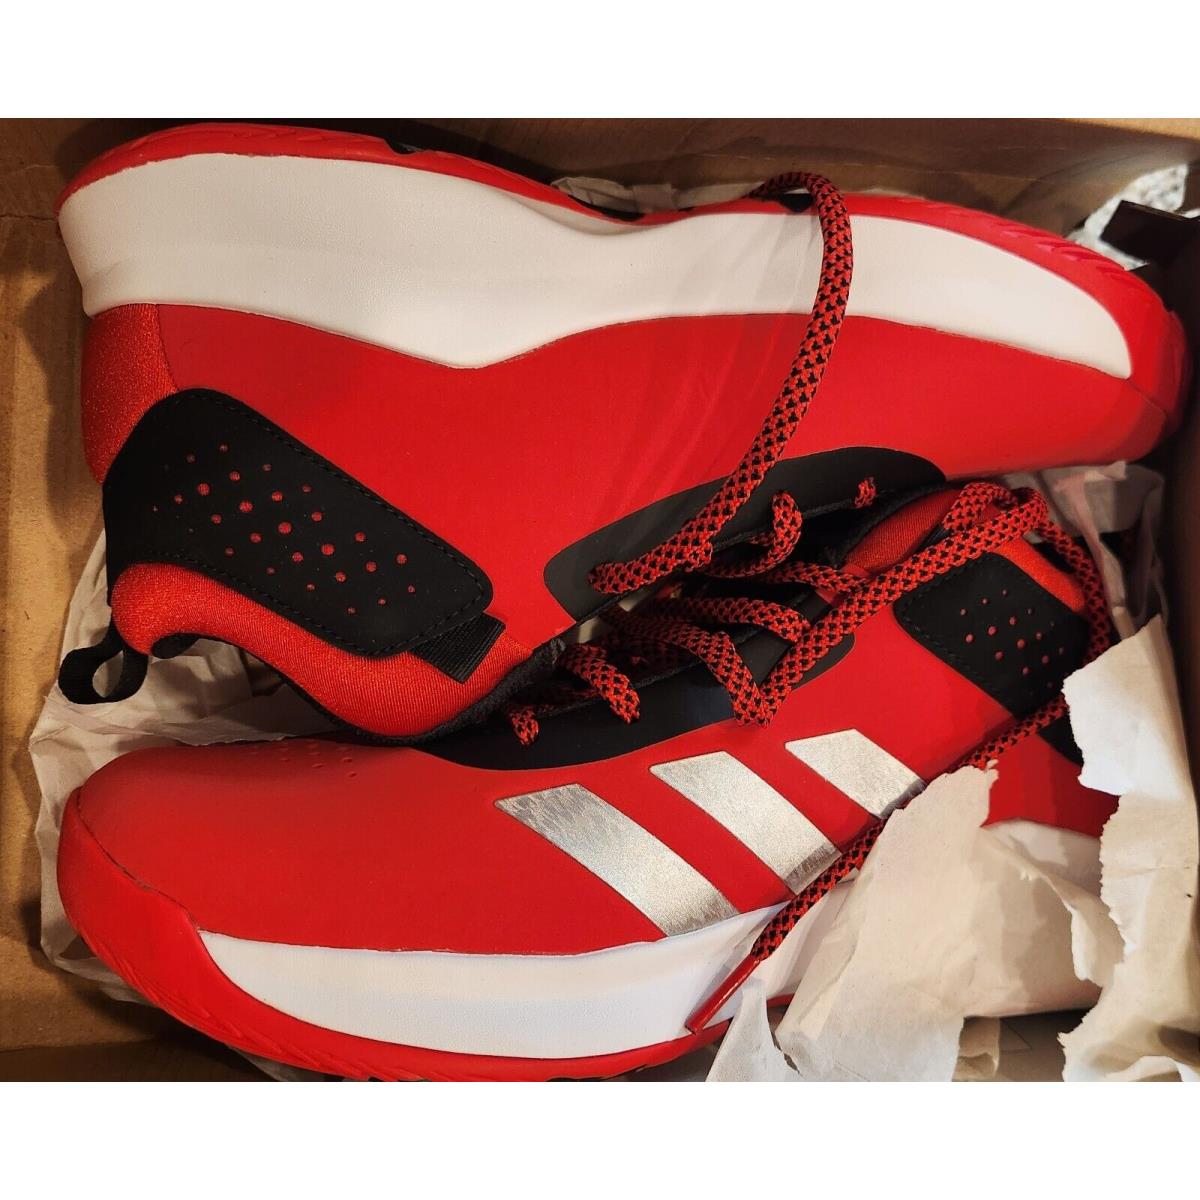 Adidas shoes Cross - Red 0